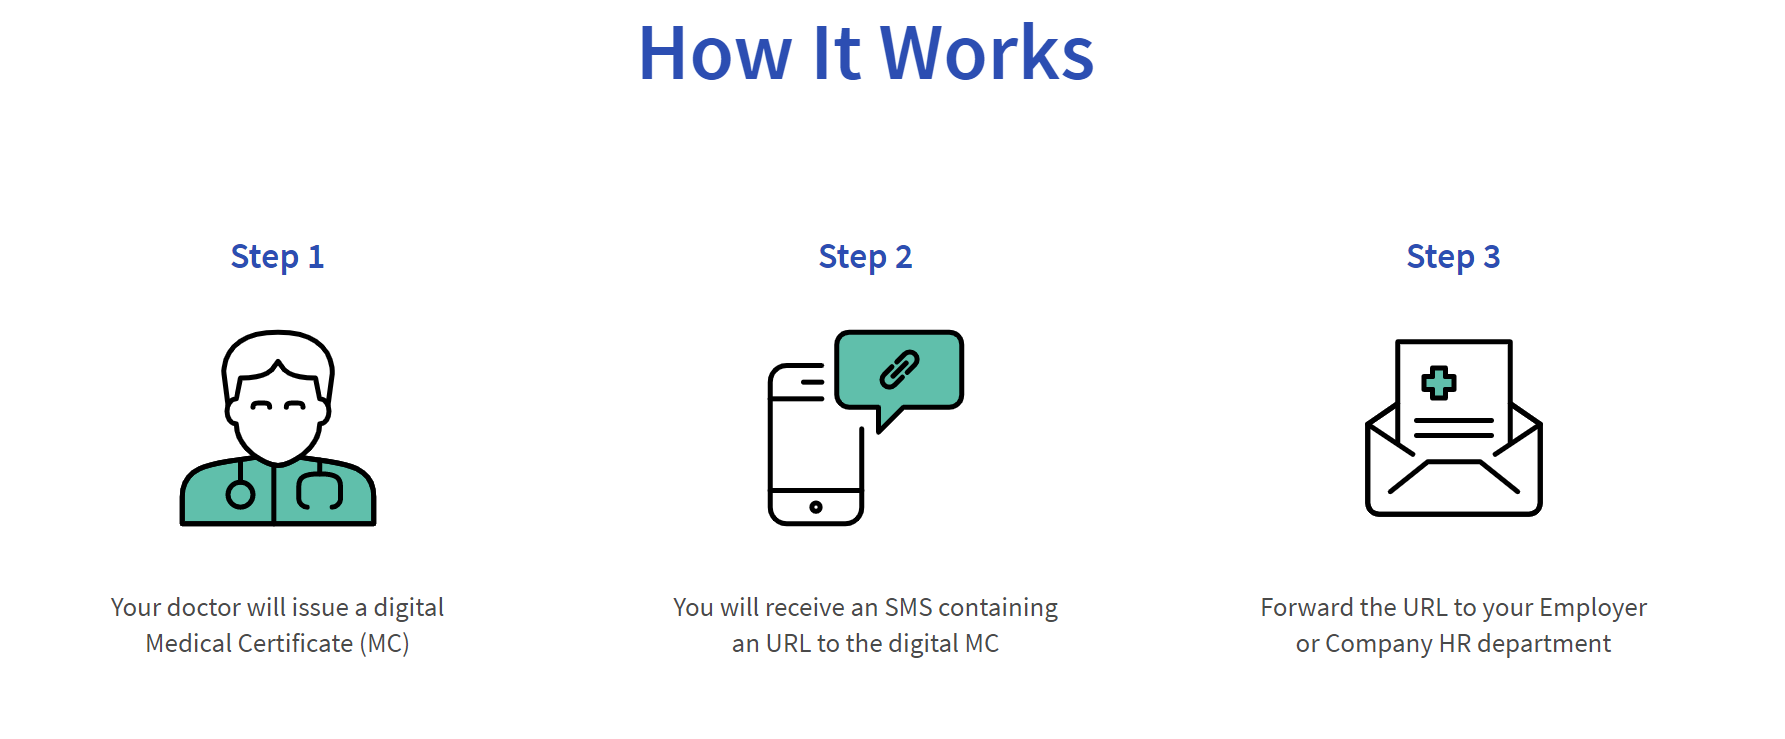 The process of how DigiMC works